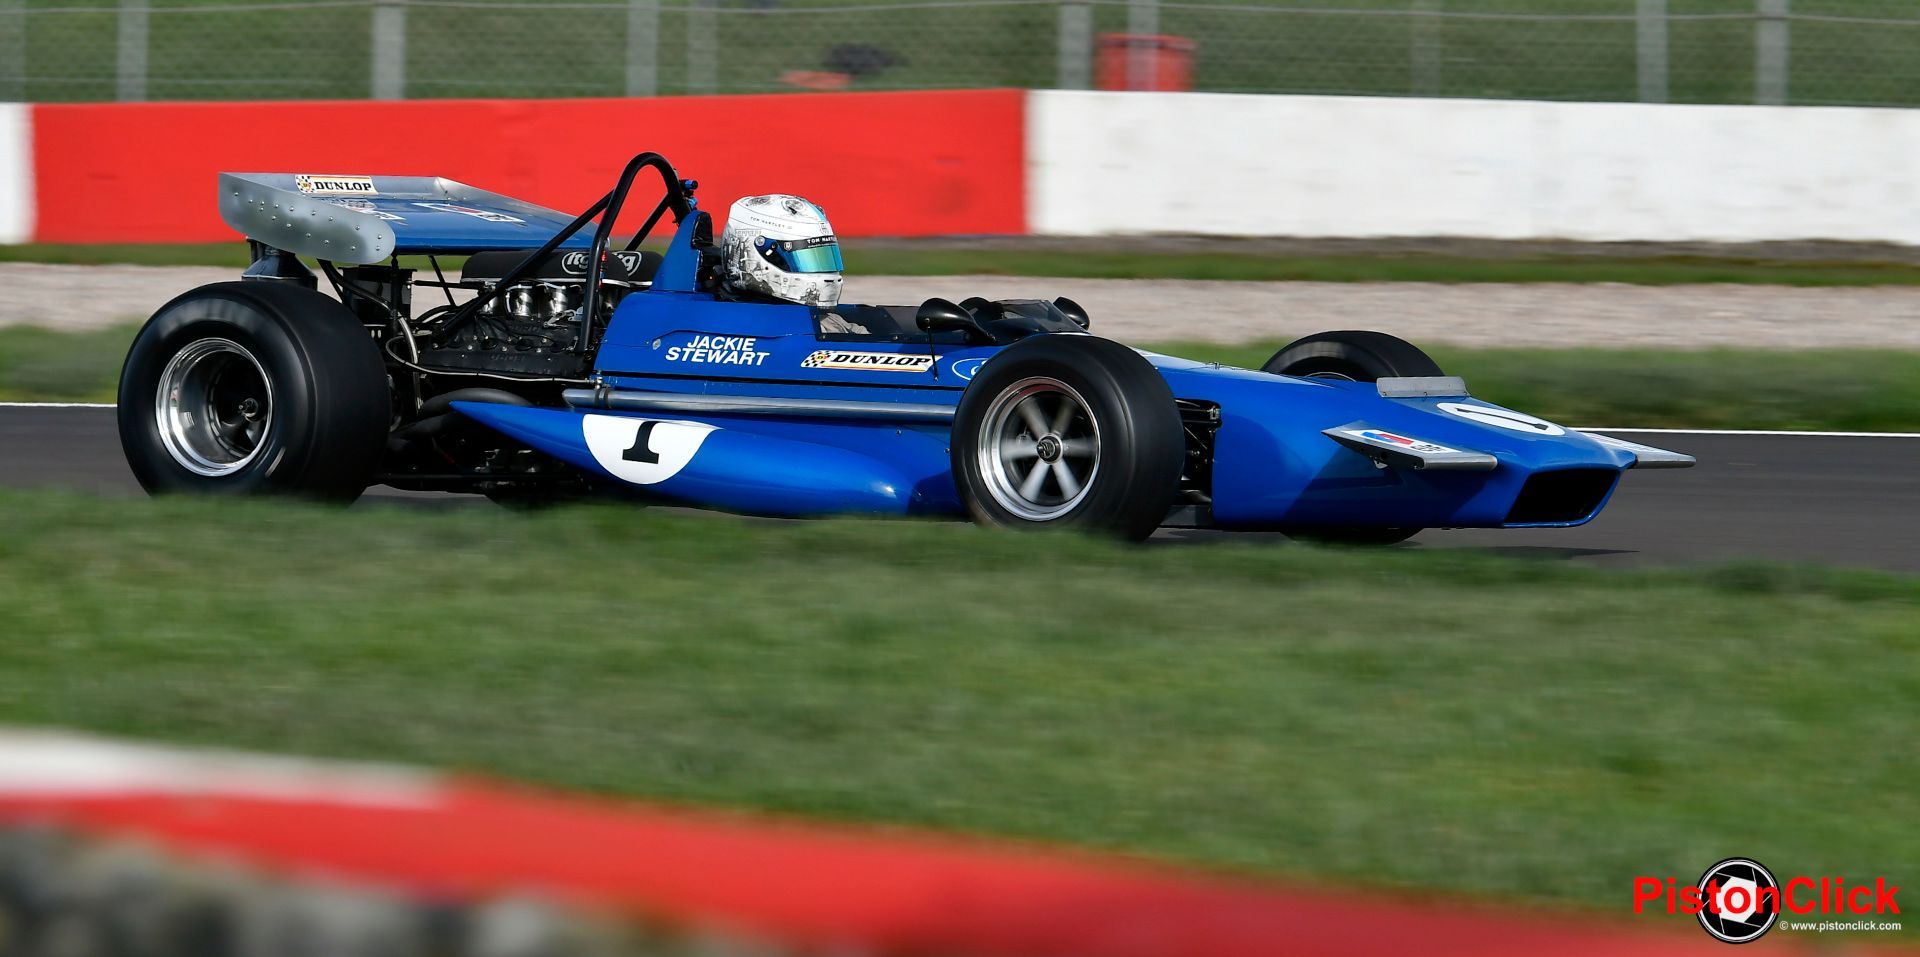 F1 Matra at the historic masters test day 